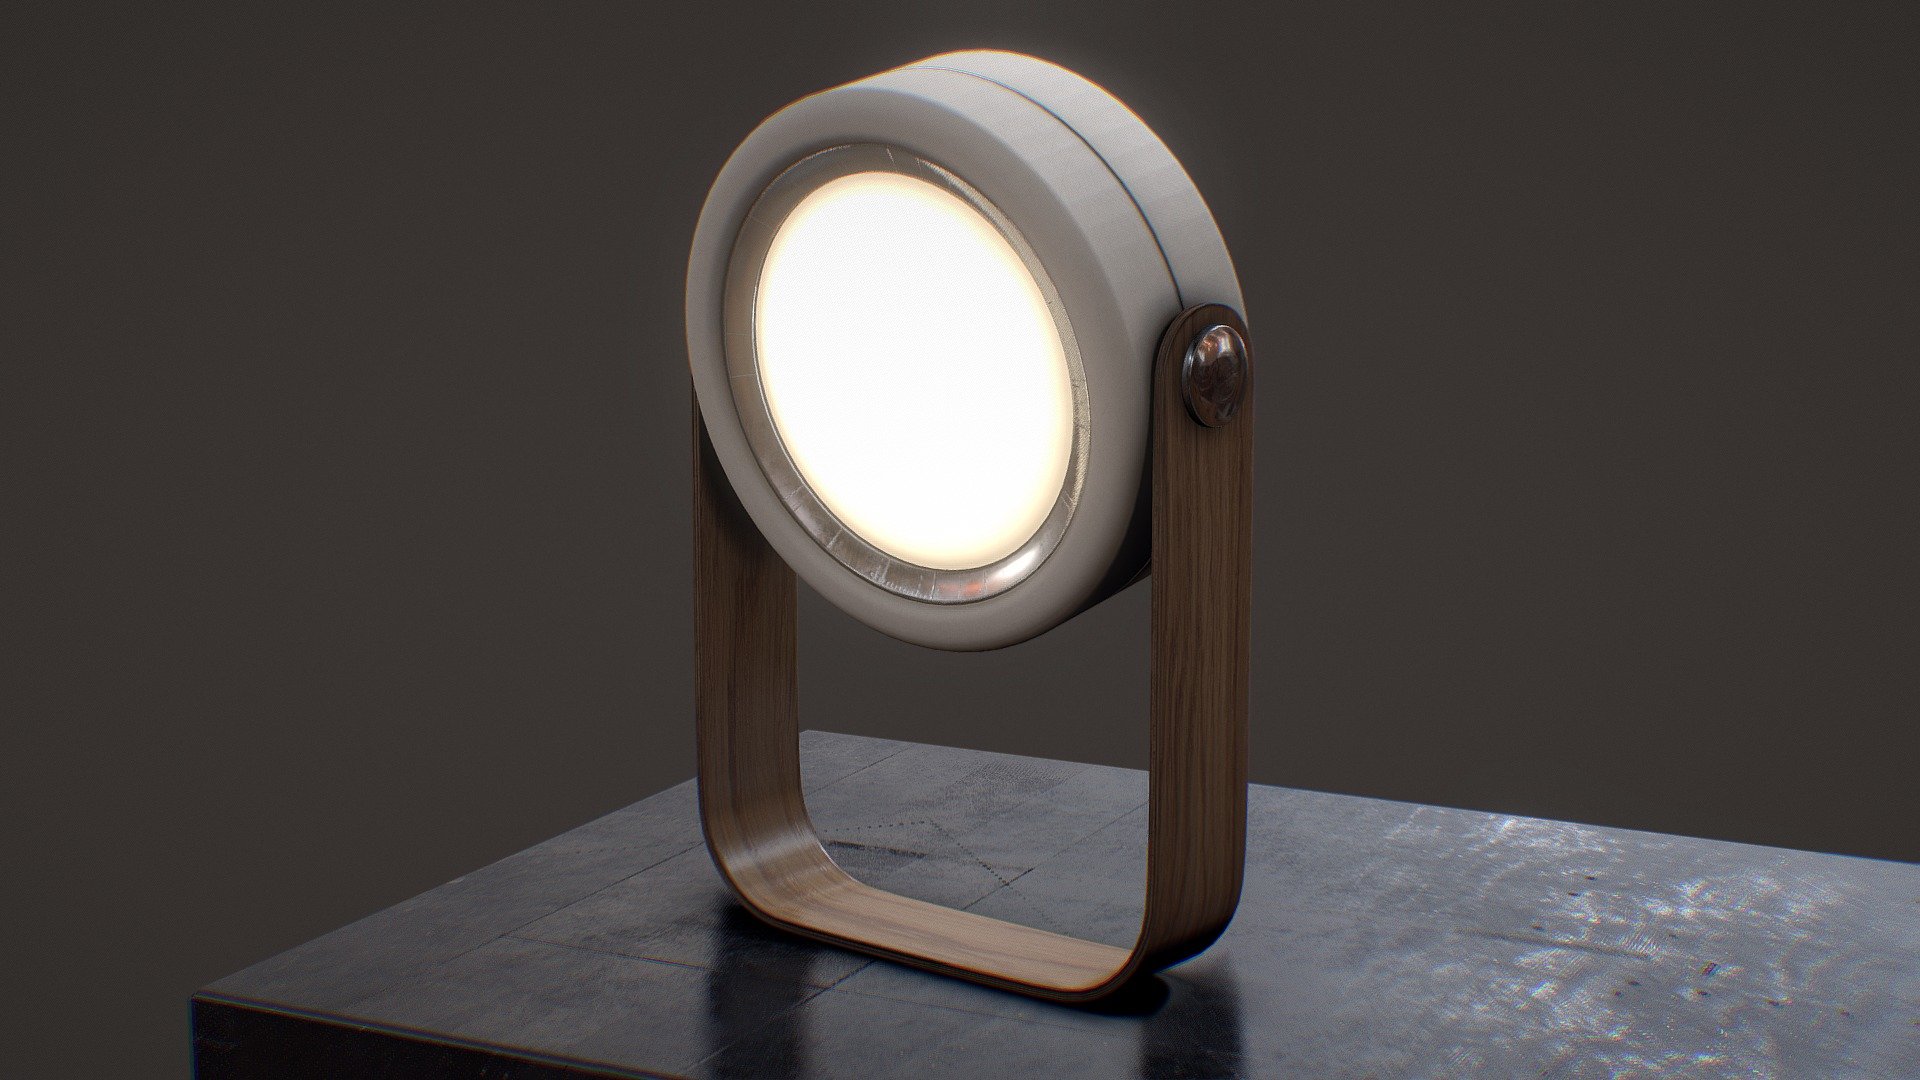 Modern Wooden  Lamp

Another lamp:
https://sketchfab.com/3d-models/modern-wooden-floor-lamp-73a5a0b775bb44dda149cb4a9981761f

Drag and Drop and you are good to go. 4k Textures. It is possible to change the image by editing the emissive map. It is a very simple process.

Check my profile for free models https://sketchfab.com/re1monsen If you enjoy my work please consider supporting me I have many affordable models in the shop. Smash that follow!

Feel free to contact me. I’d love yo hear from you.

Thanks! - Modern Lamp - Buy Royalty Free 3D model by re1monsen 3d model